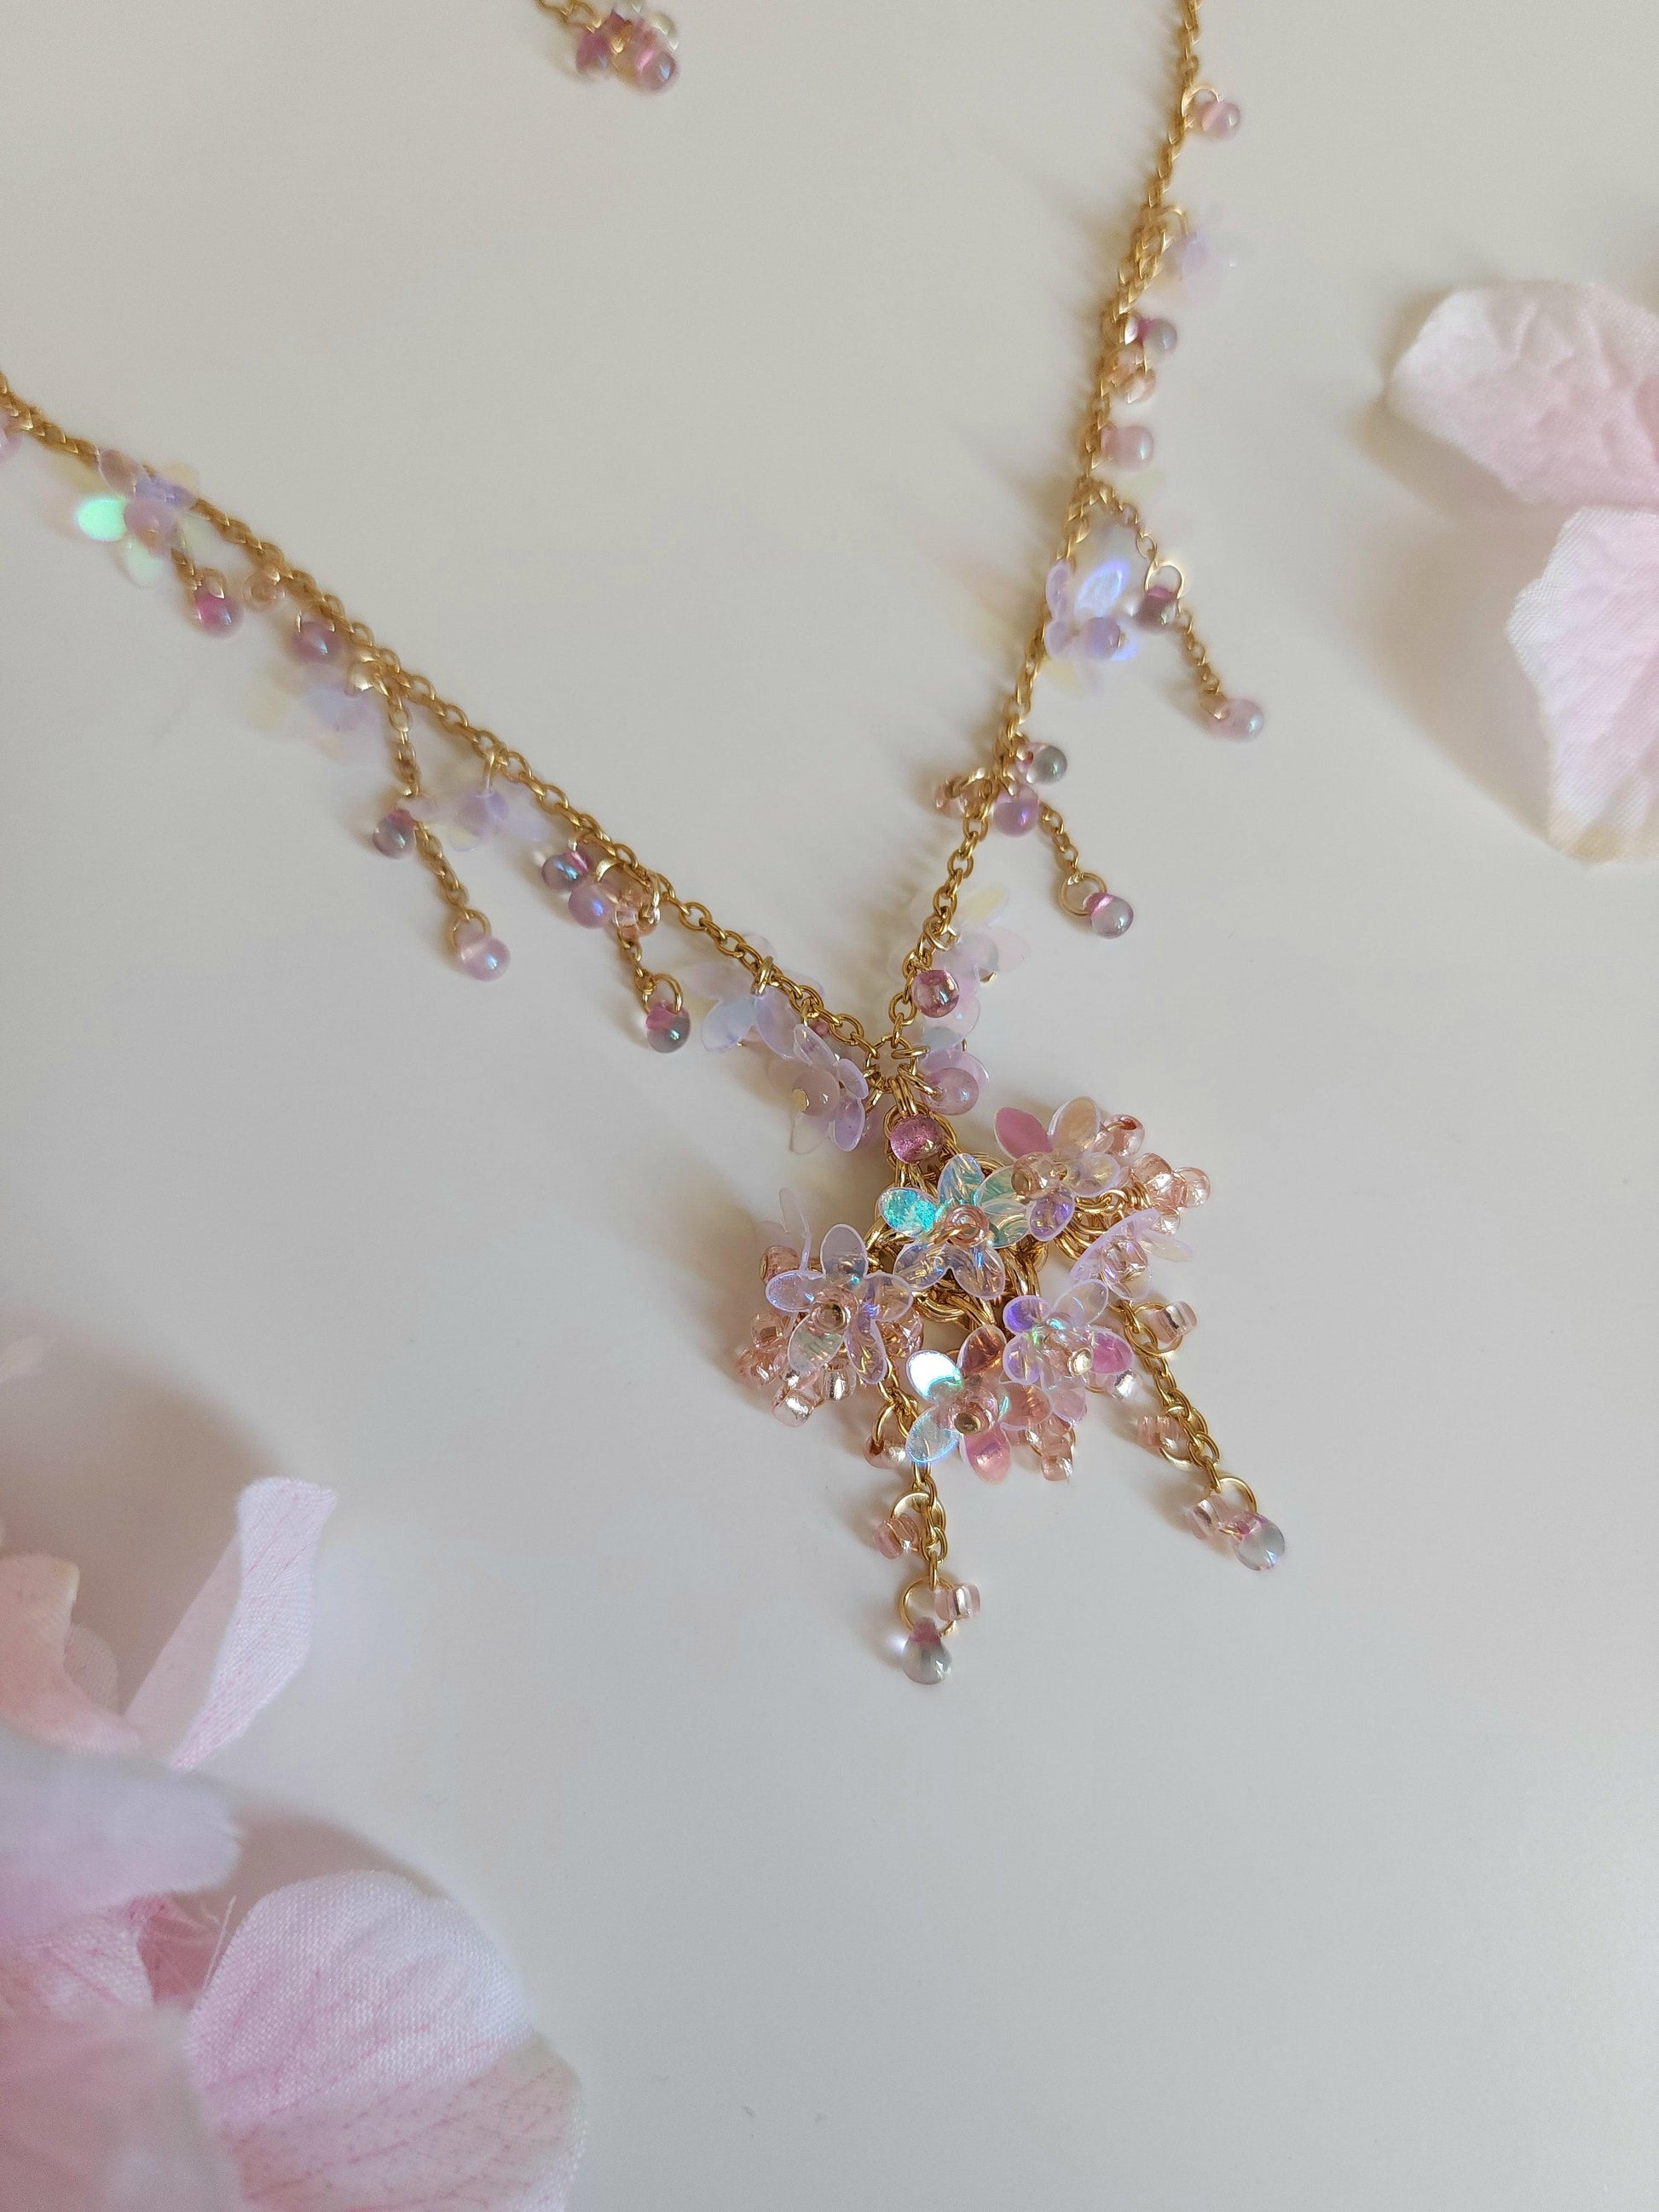 Fairy's Iridescent Flowers Necklace - By Cocoyu